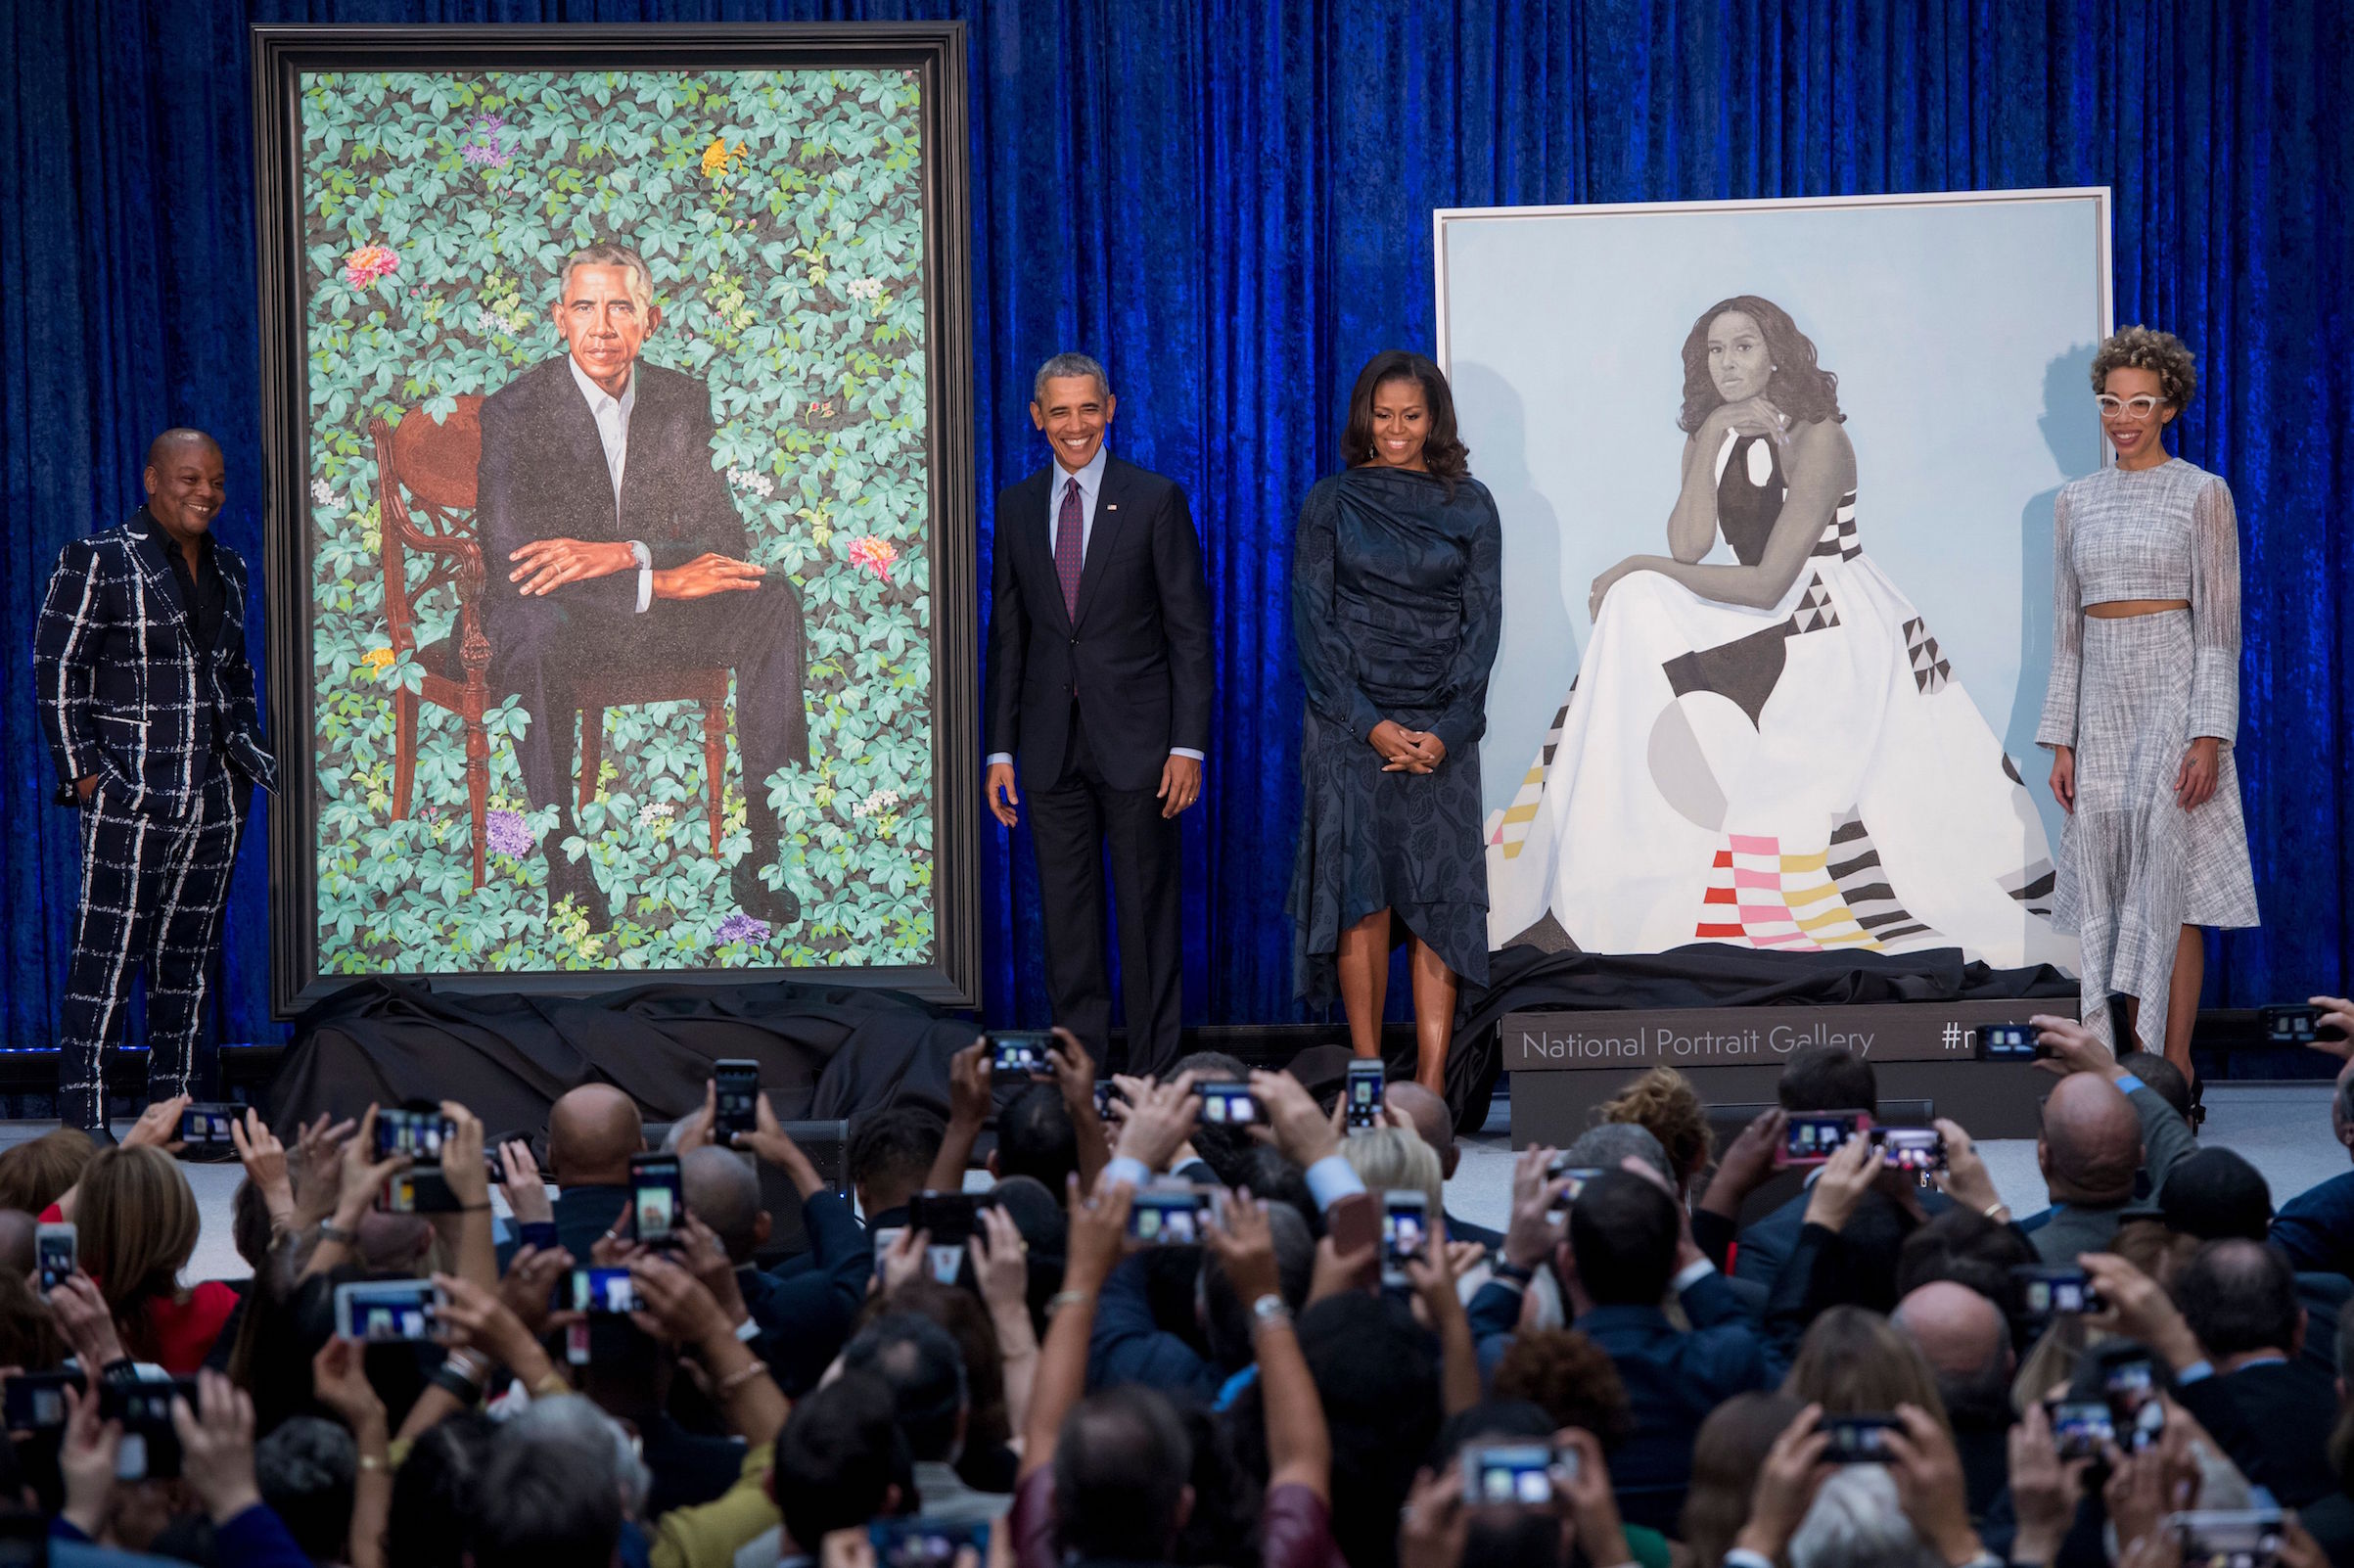 Portraits Of Barack And Michelle Obama Unveiled At The National Portrait Gallery